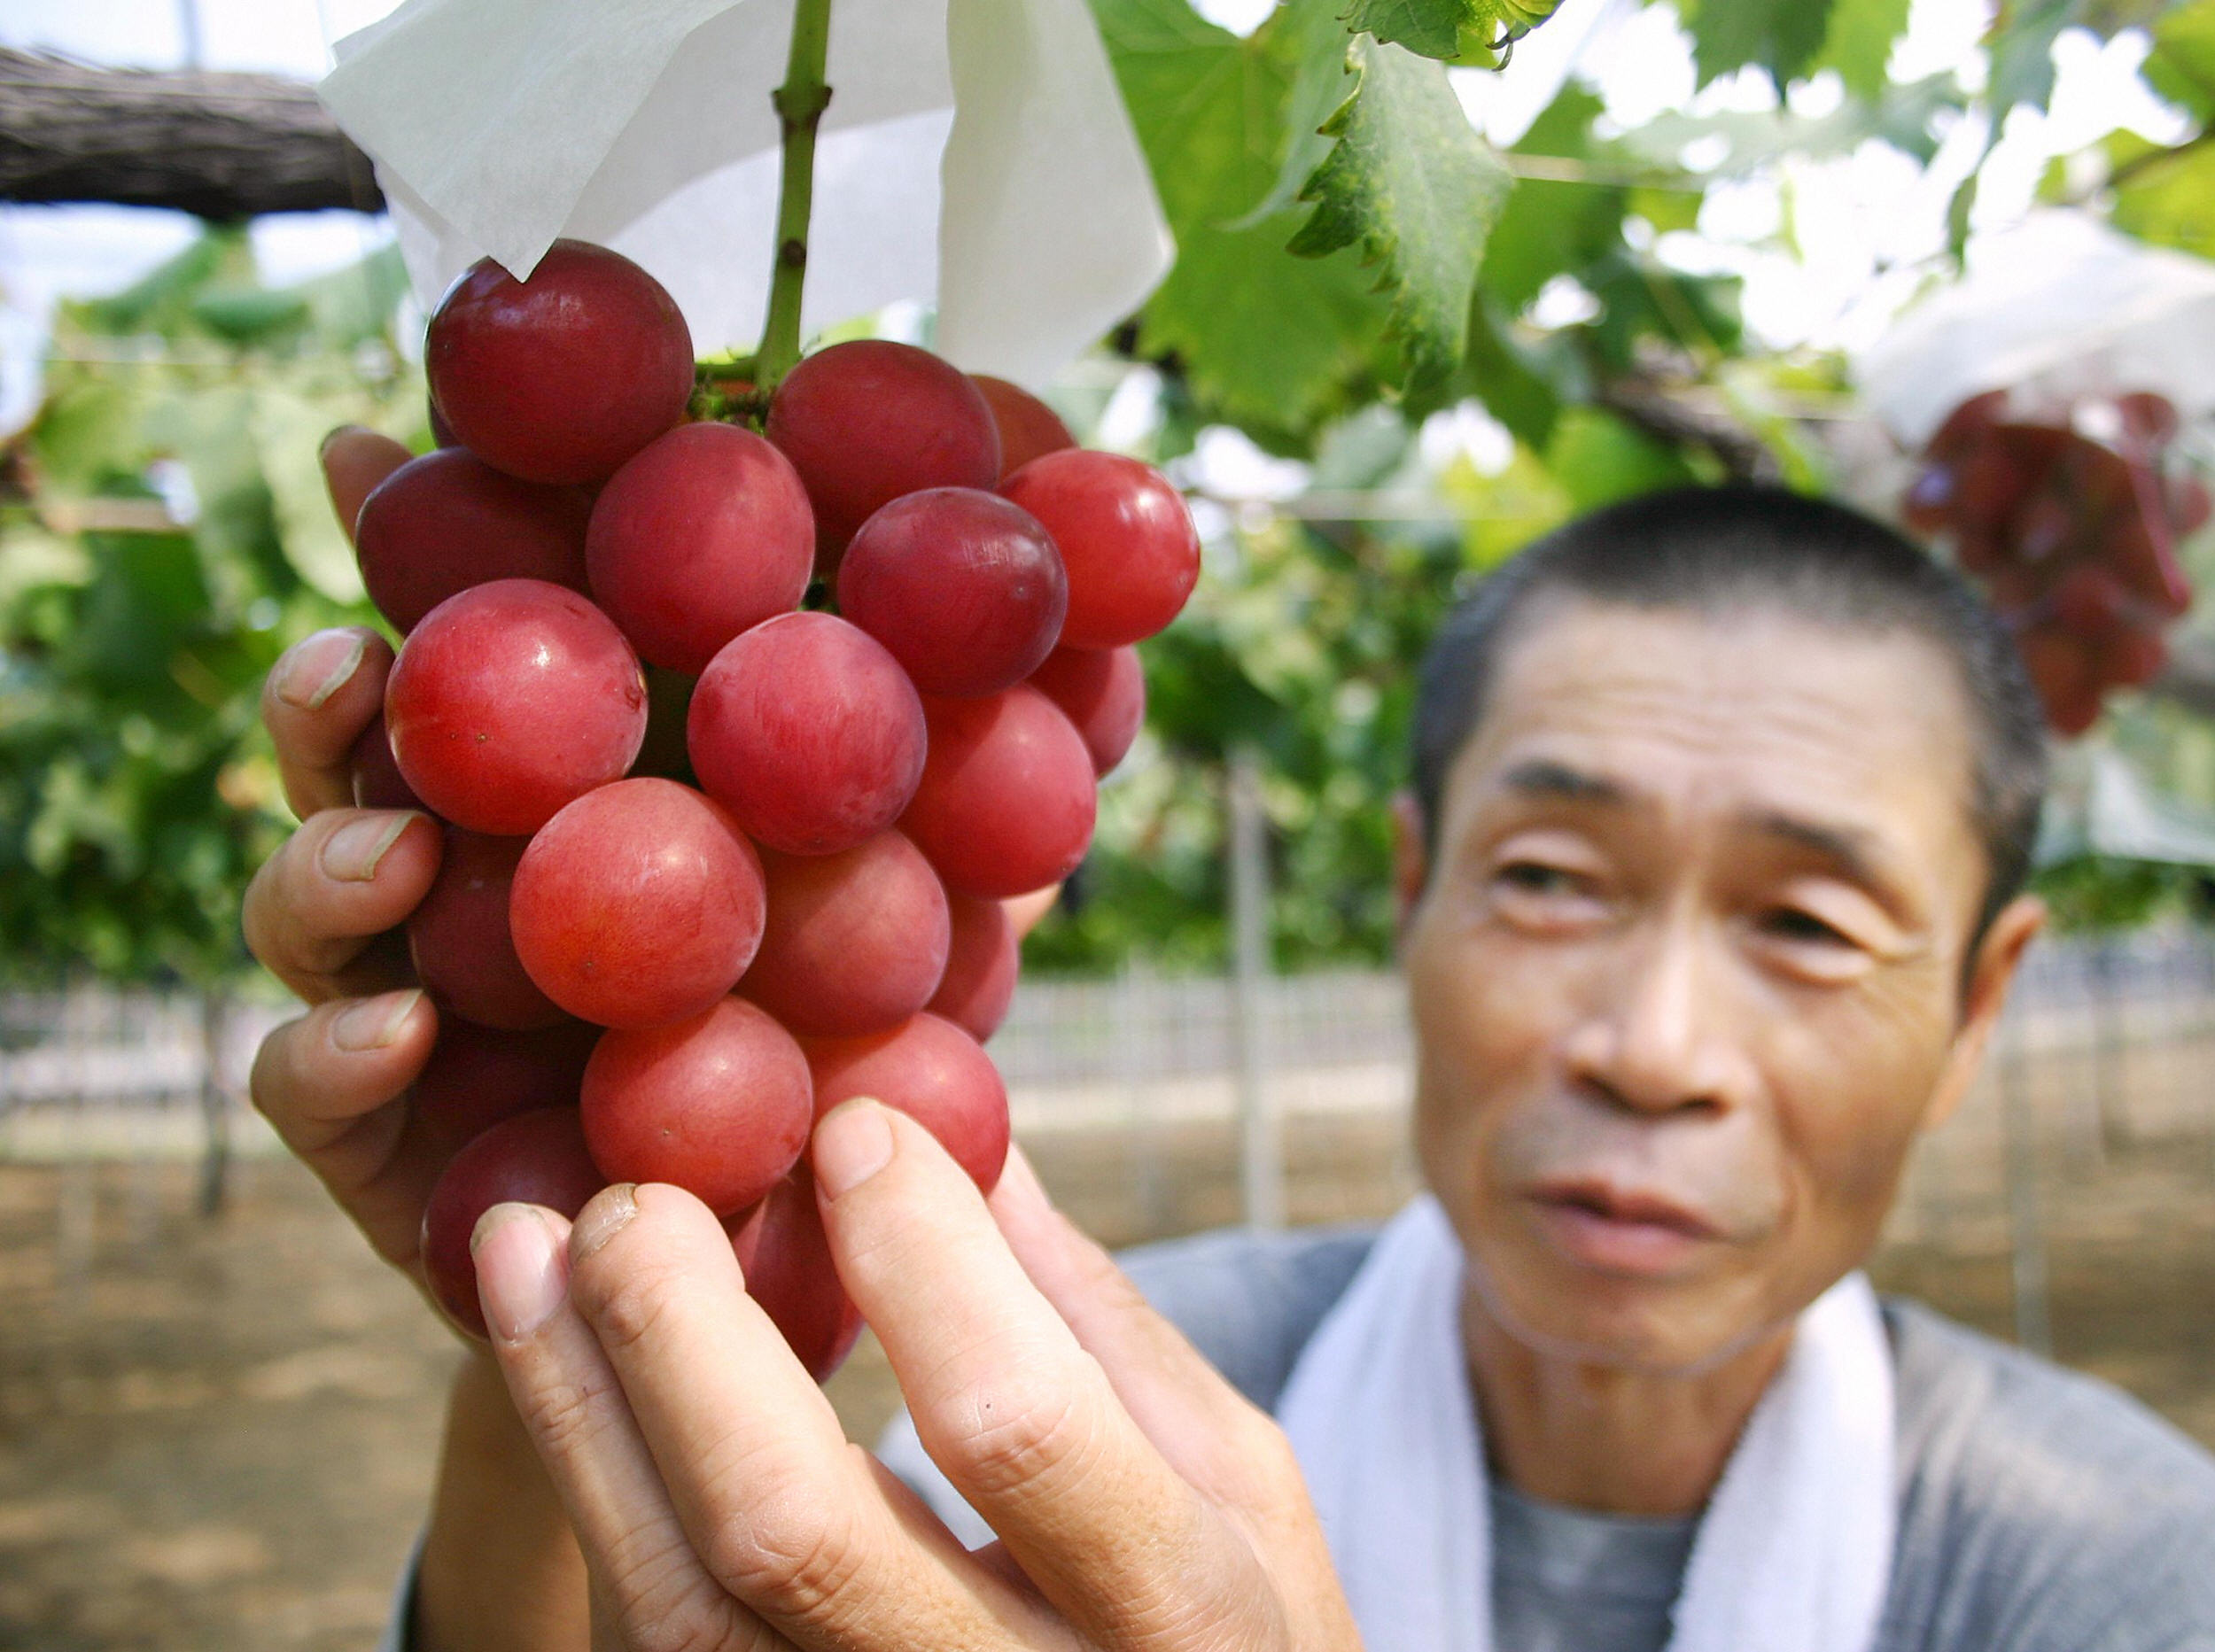 This bunch of grapes just sold for $11,000 in Japan | CNN Travel